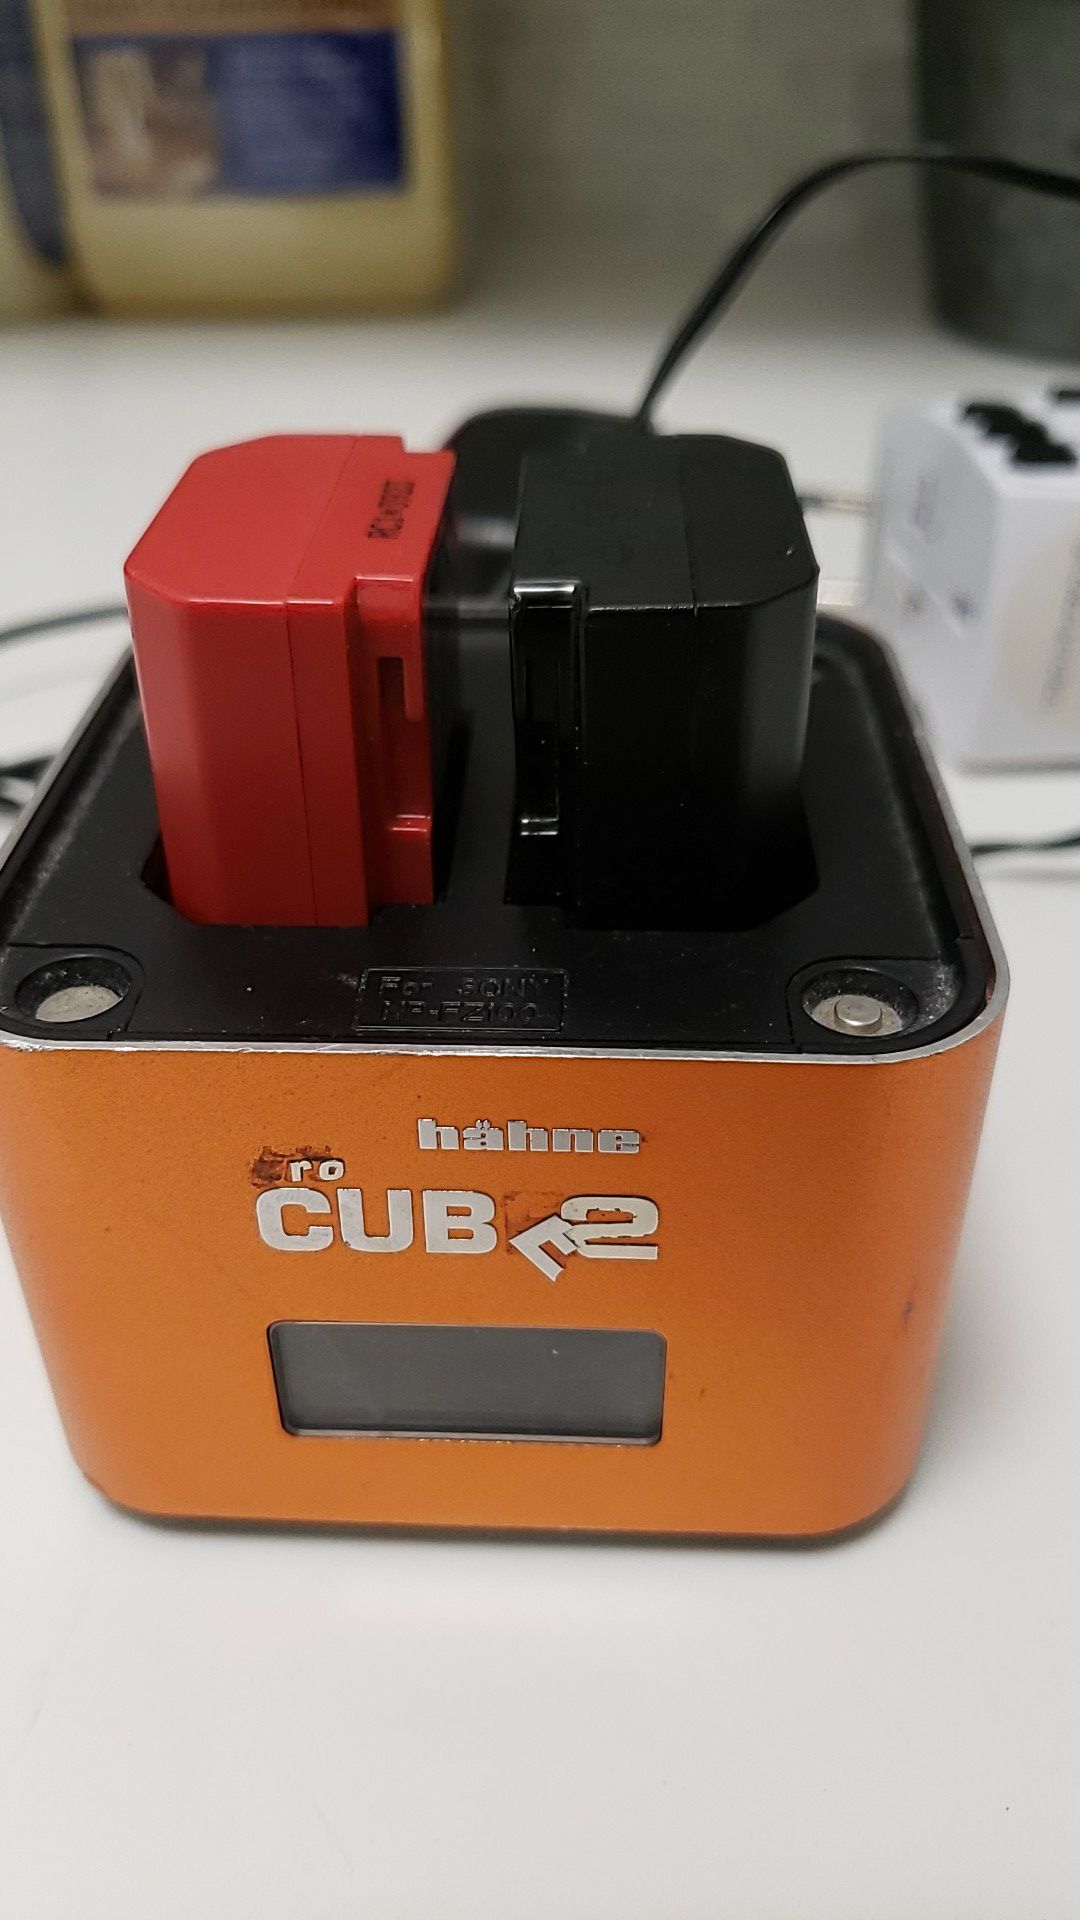 Hahne cube 2 for sony dsl cameras.